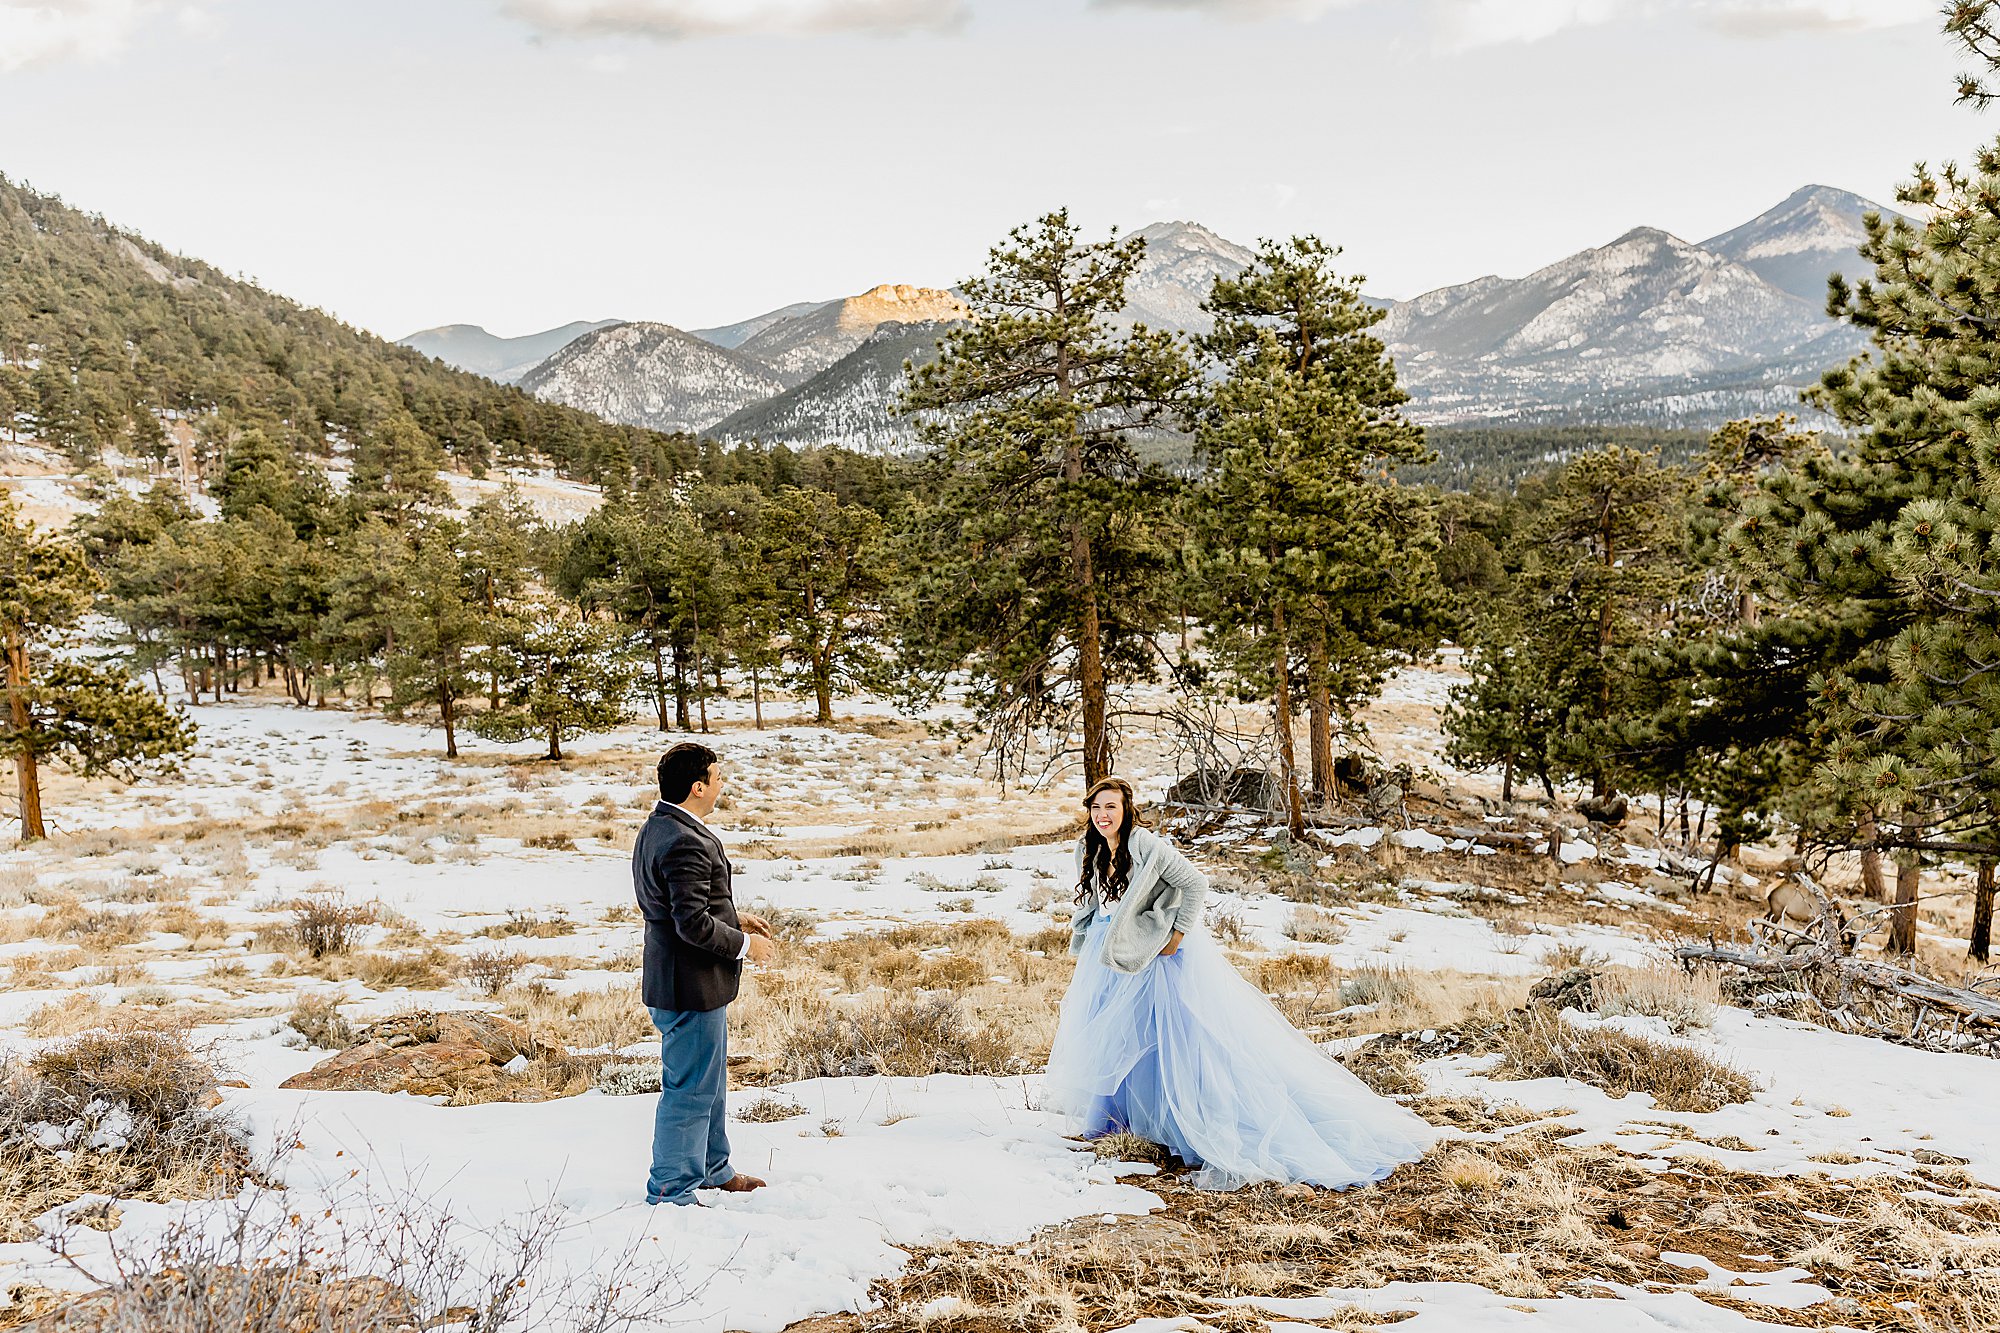 Couple has snowball fight in rocky mountain national park for their winter elopement